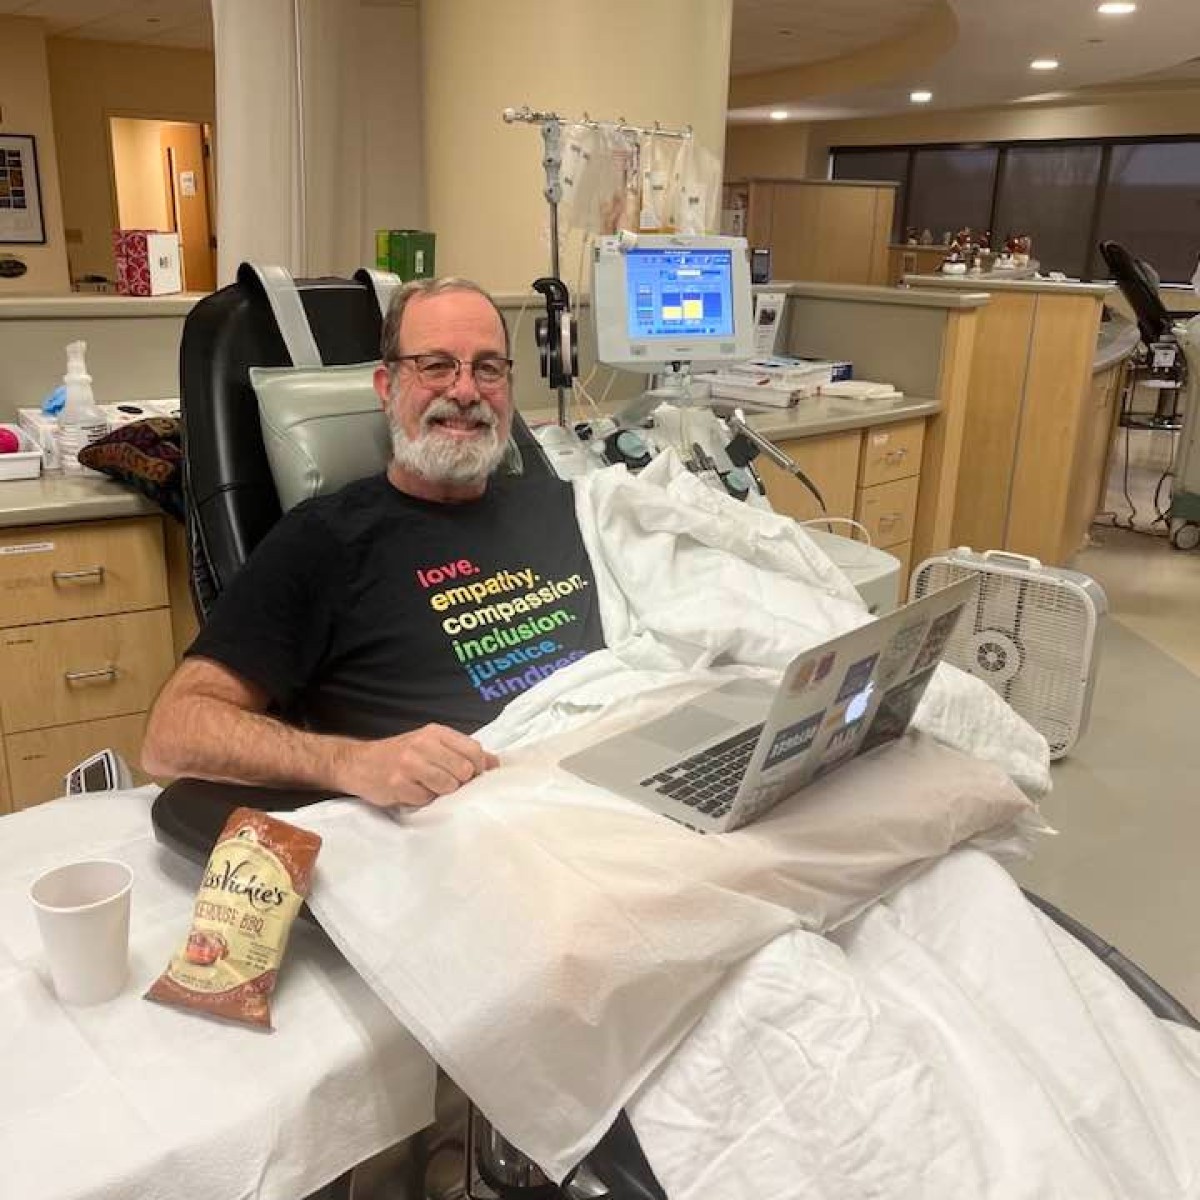 Meet Dave! 🌟 A regular donor at the Pittsburgh Donation Center. His congregation sponsors quarterly blood drives, gathering 20-30 units. Dave donates because many in his life have needed blood. Thanks, Dave, for your incredible efforts! 🩸❤️ #BloodDonor #Pitt